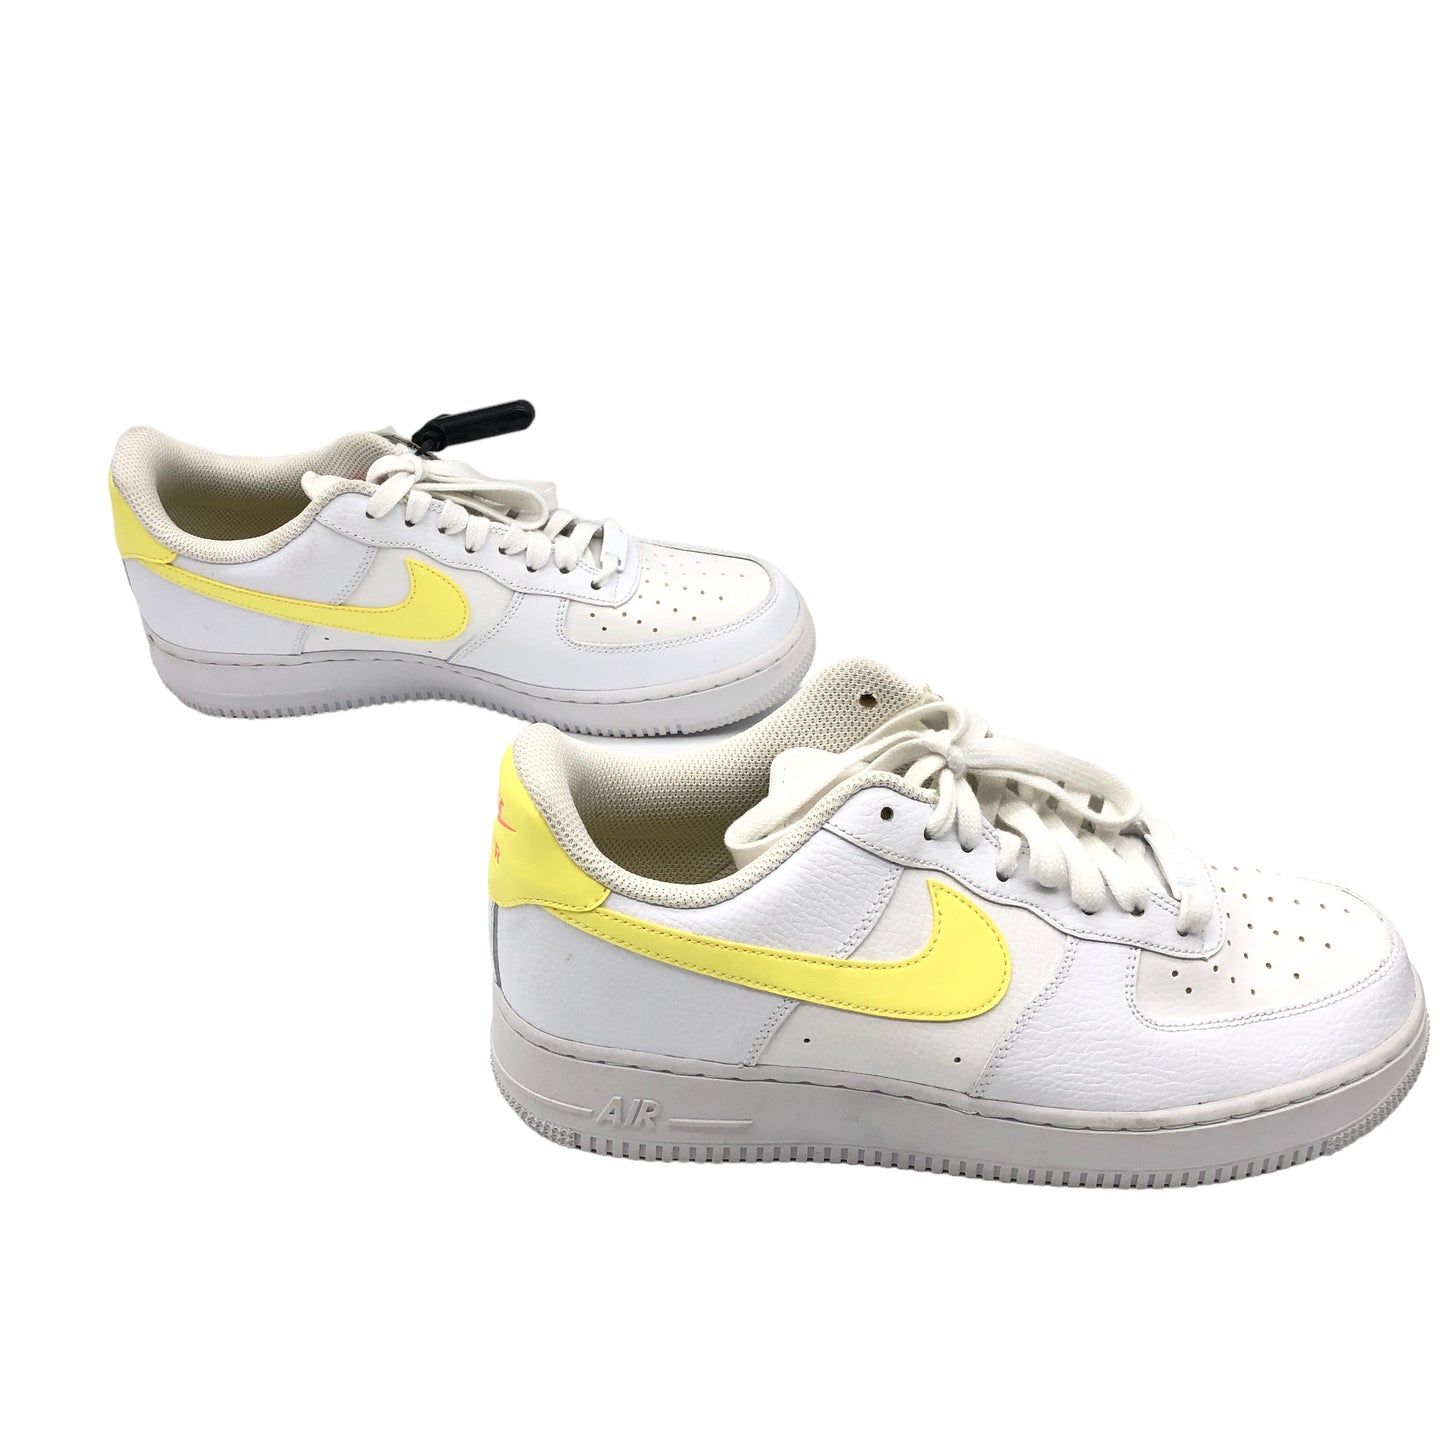 Shoes Sneakers By Nike  Size: 10.5